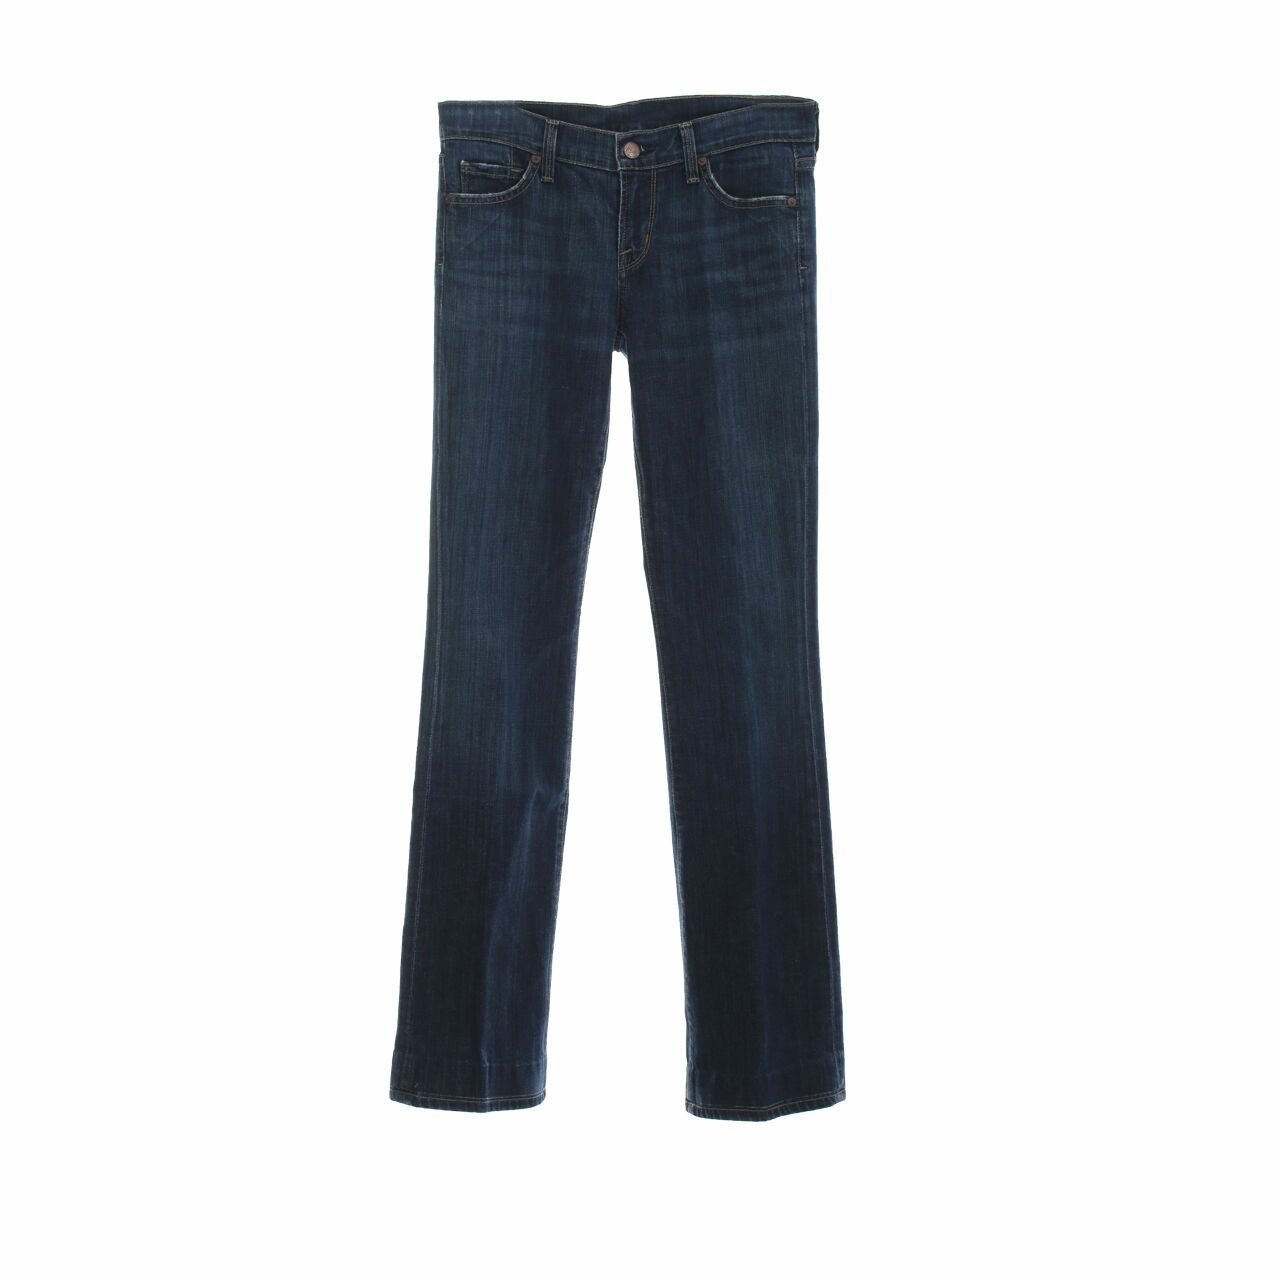 Citizens of Humanity Dark Blue Jeans